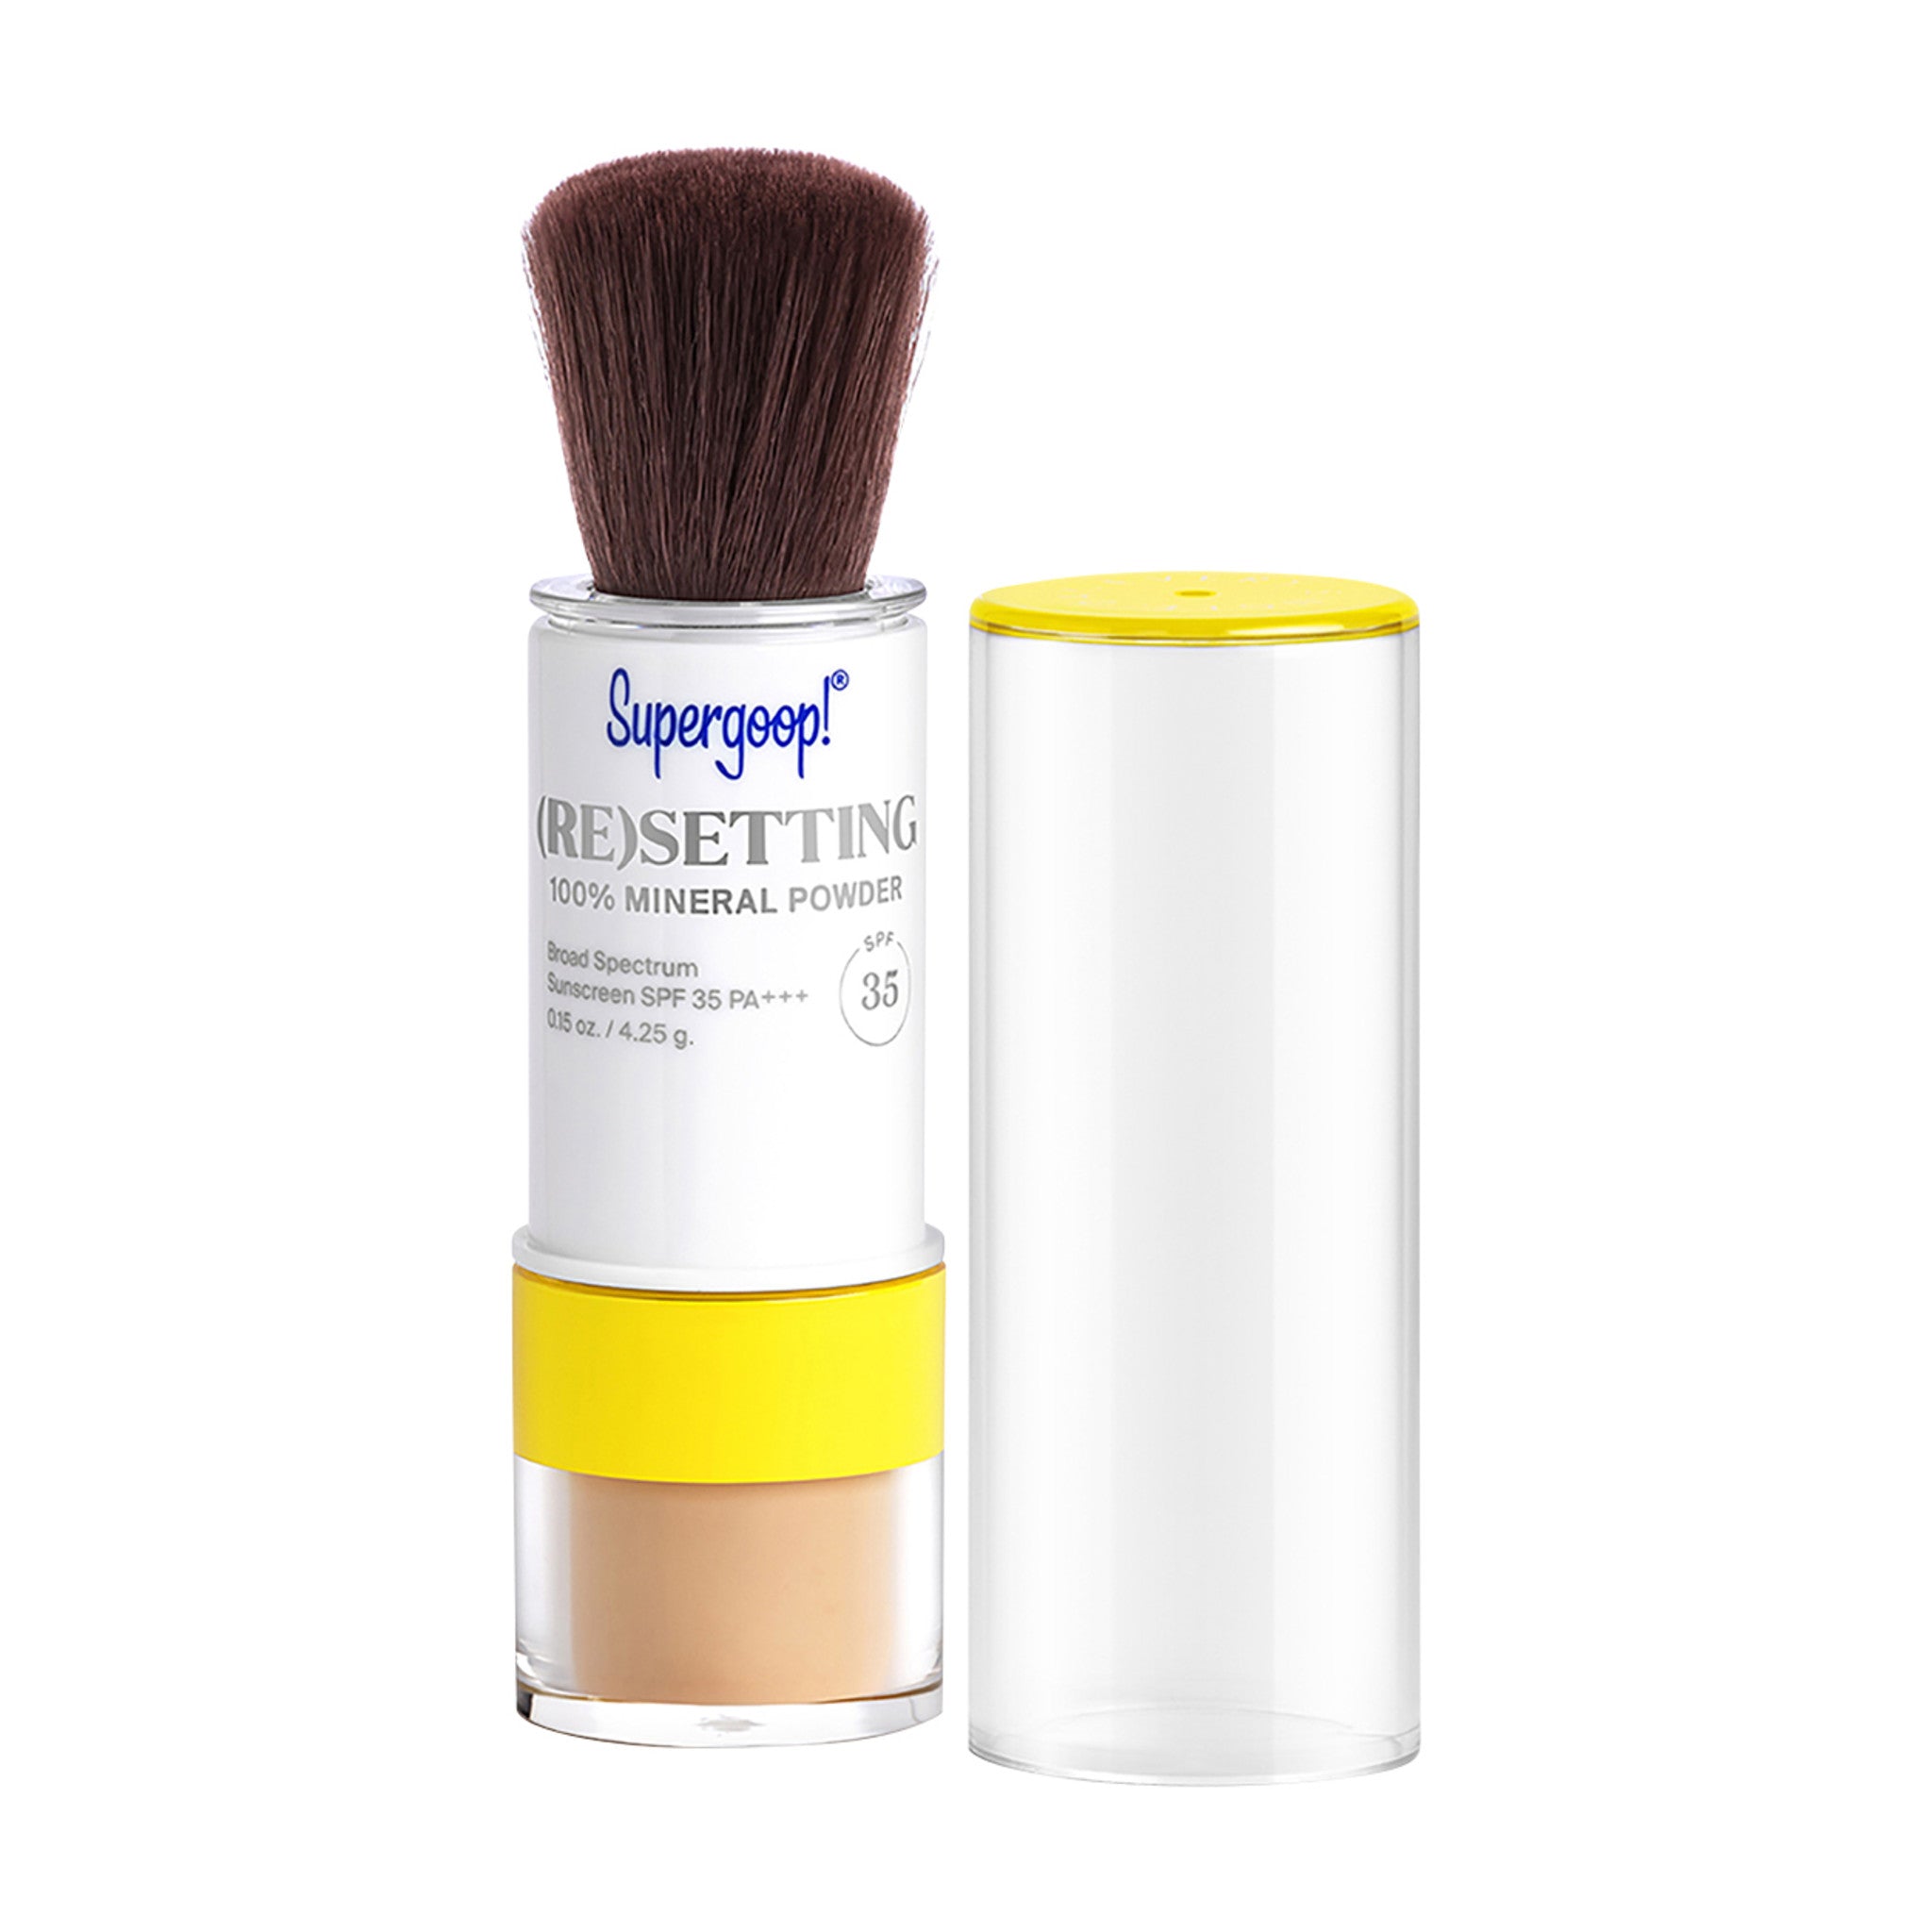 Supergoop! (Re)setting 100% Mineral Powder SPF 35 Color/Shade variant: Medium main image. This product is in the color nude